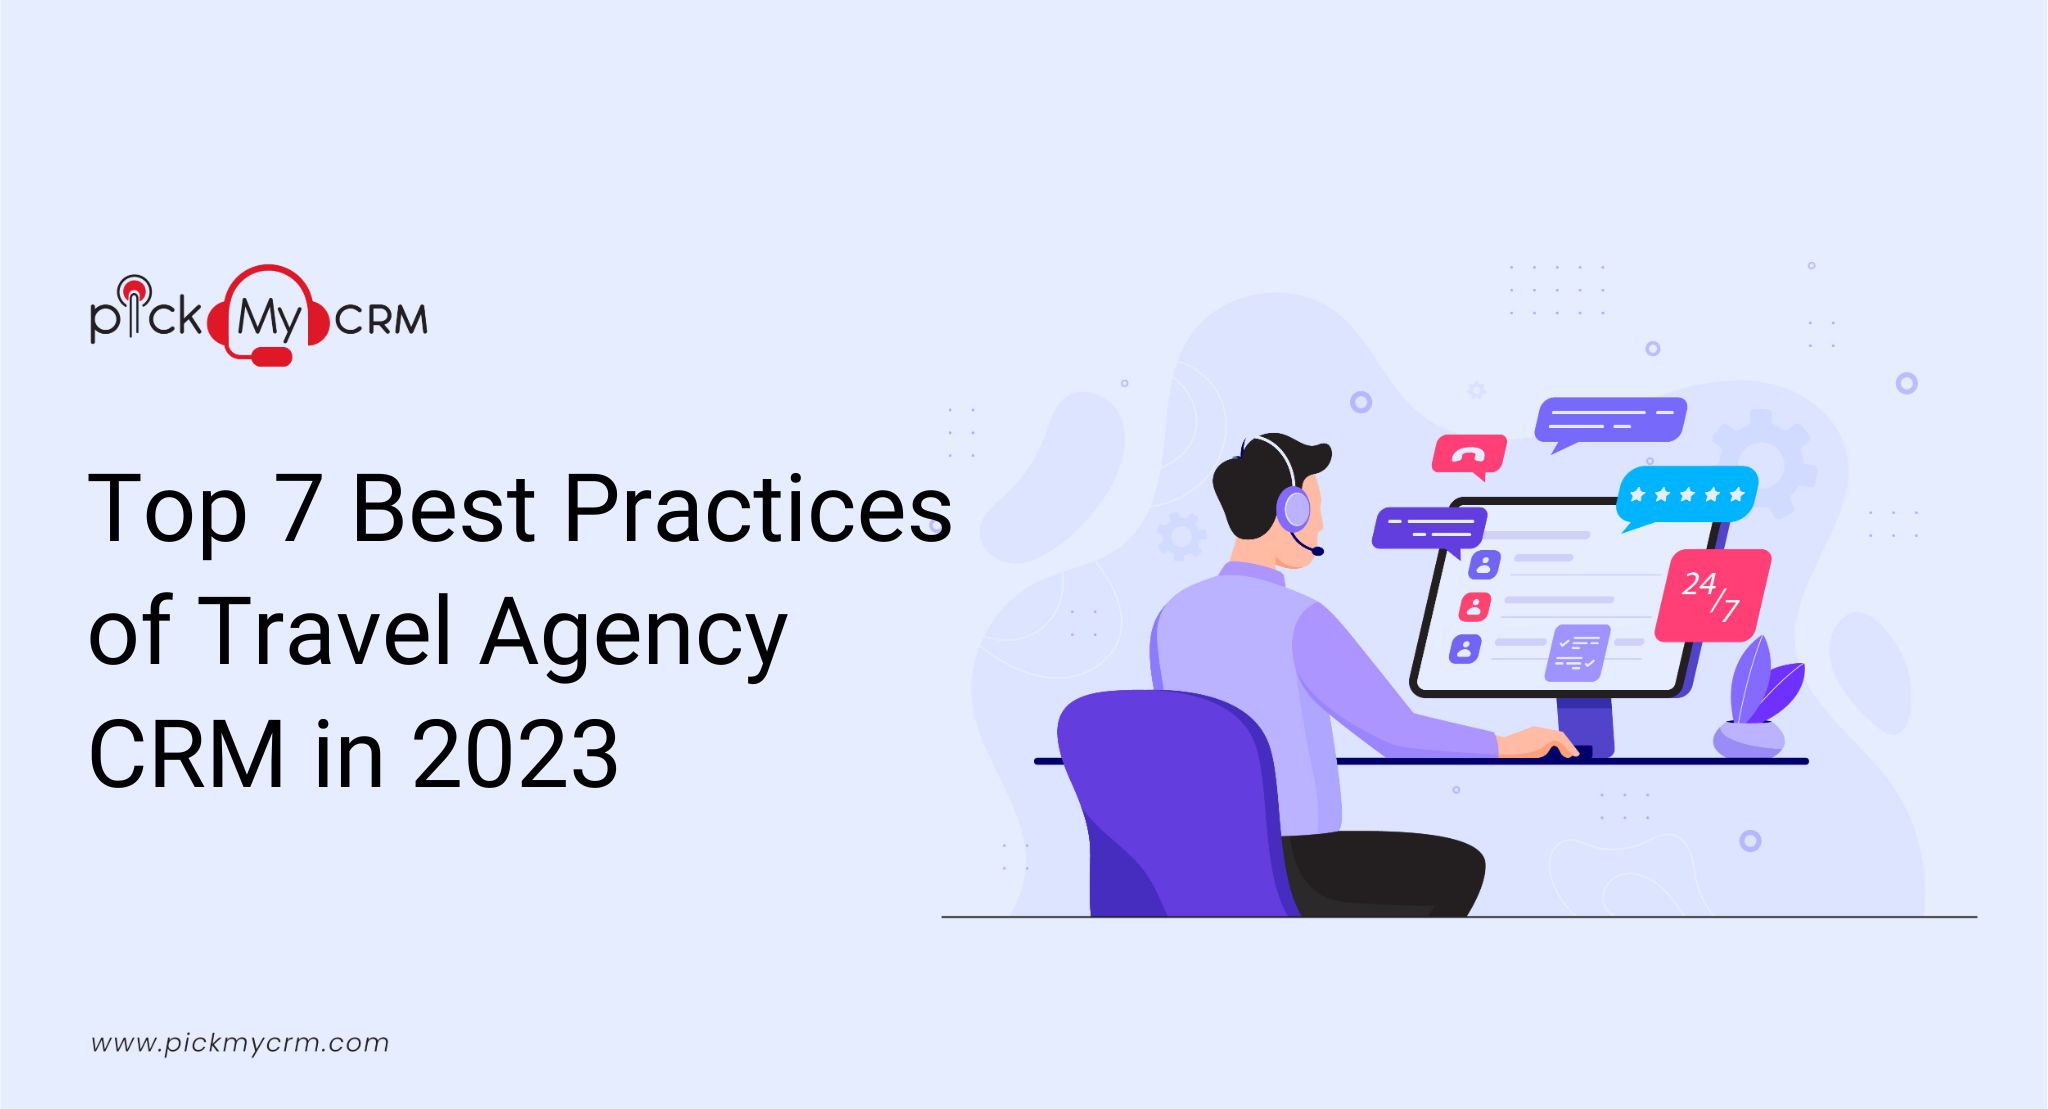 Top 7 Best Practices of Travel Agency CRM in 2023